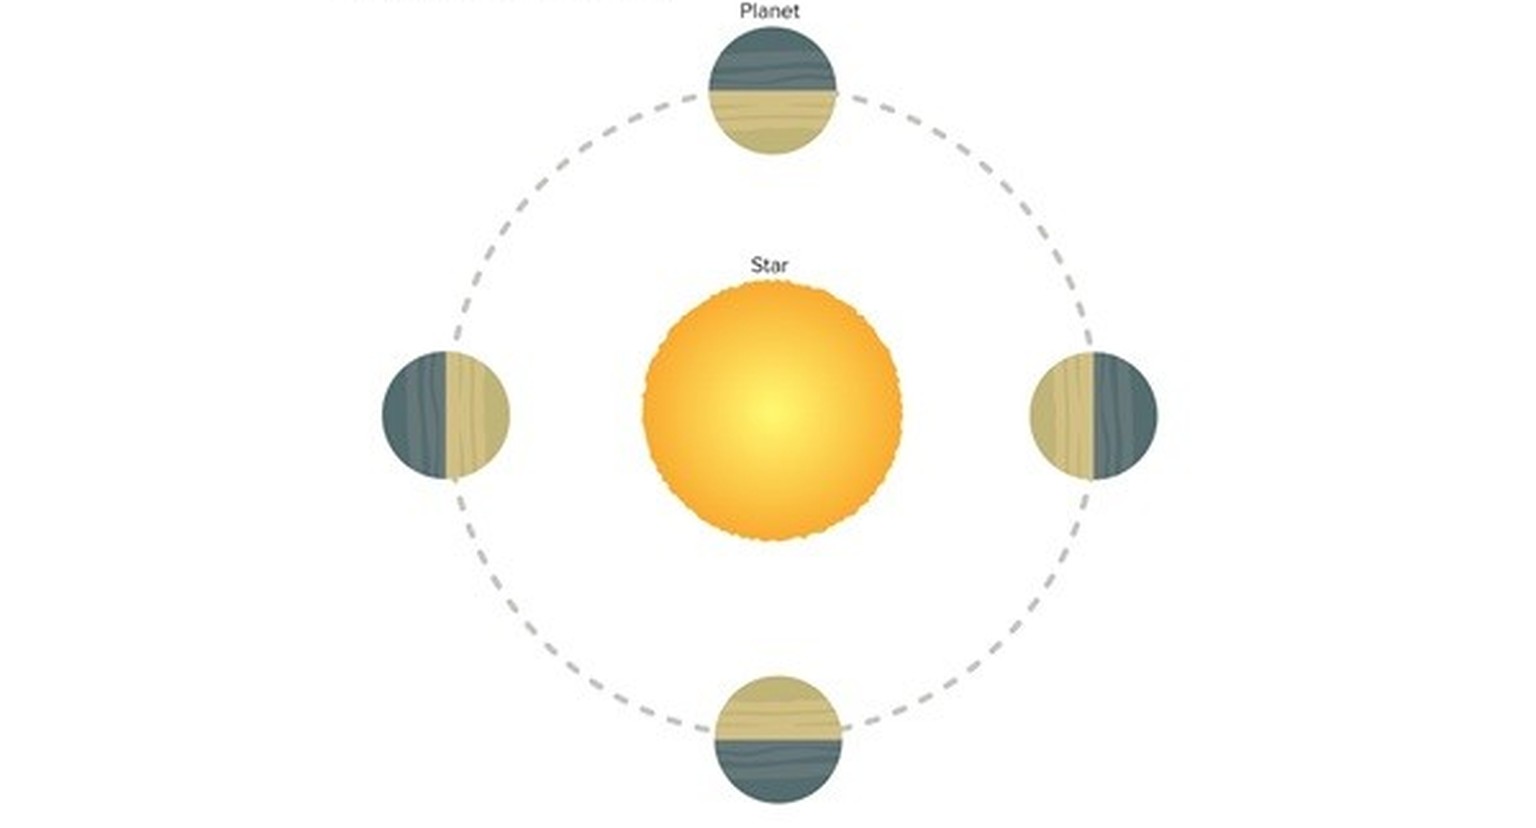 When gravitational forces slow or accelerate the rotation of an astronomical body it can become tidally locked to its parent body (in this example, a planet is tidally locked to its star). Under these ...